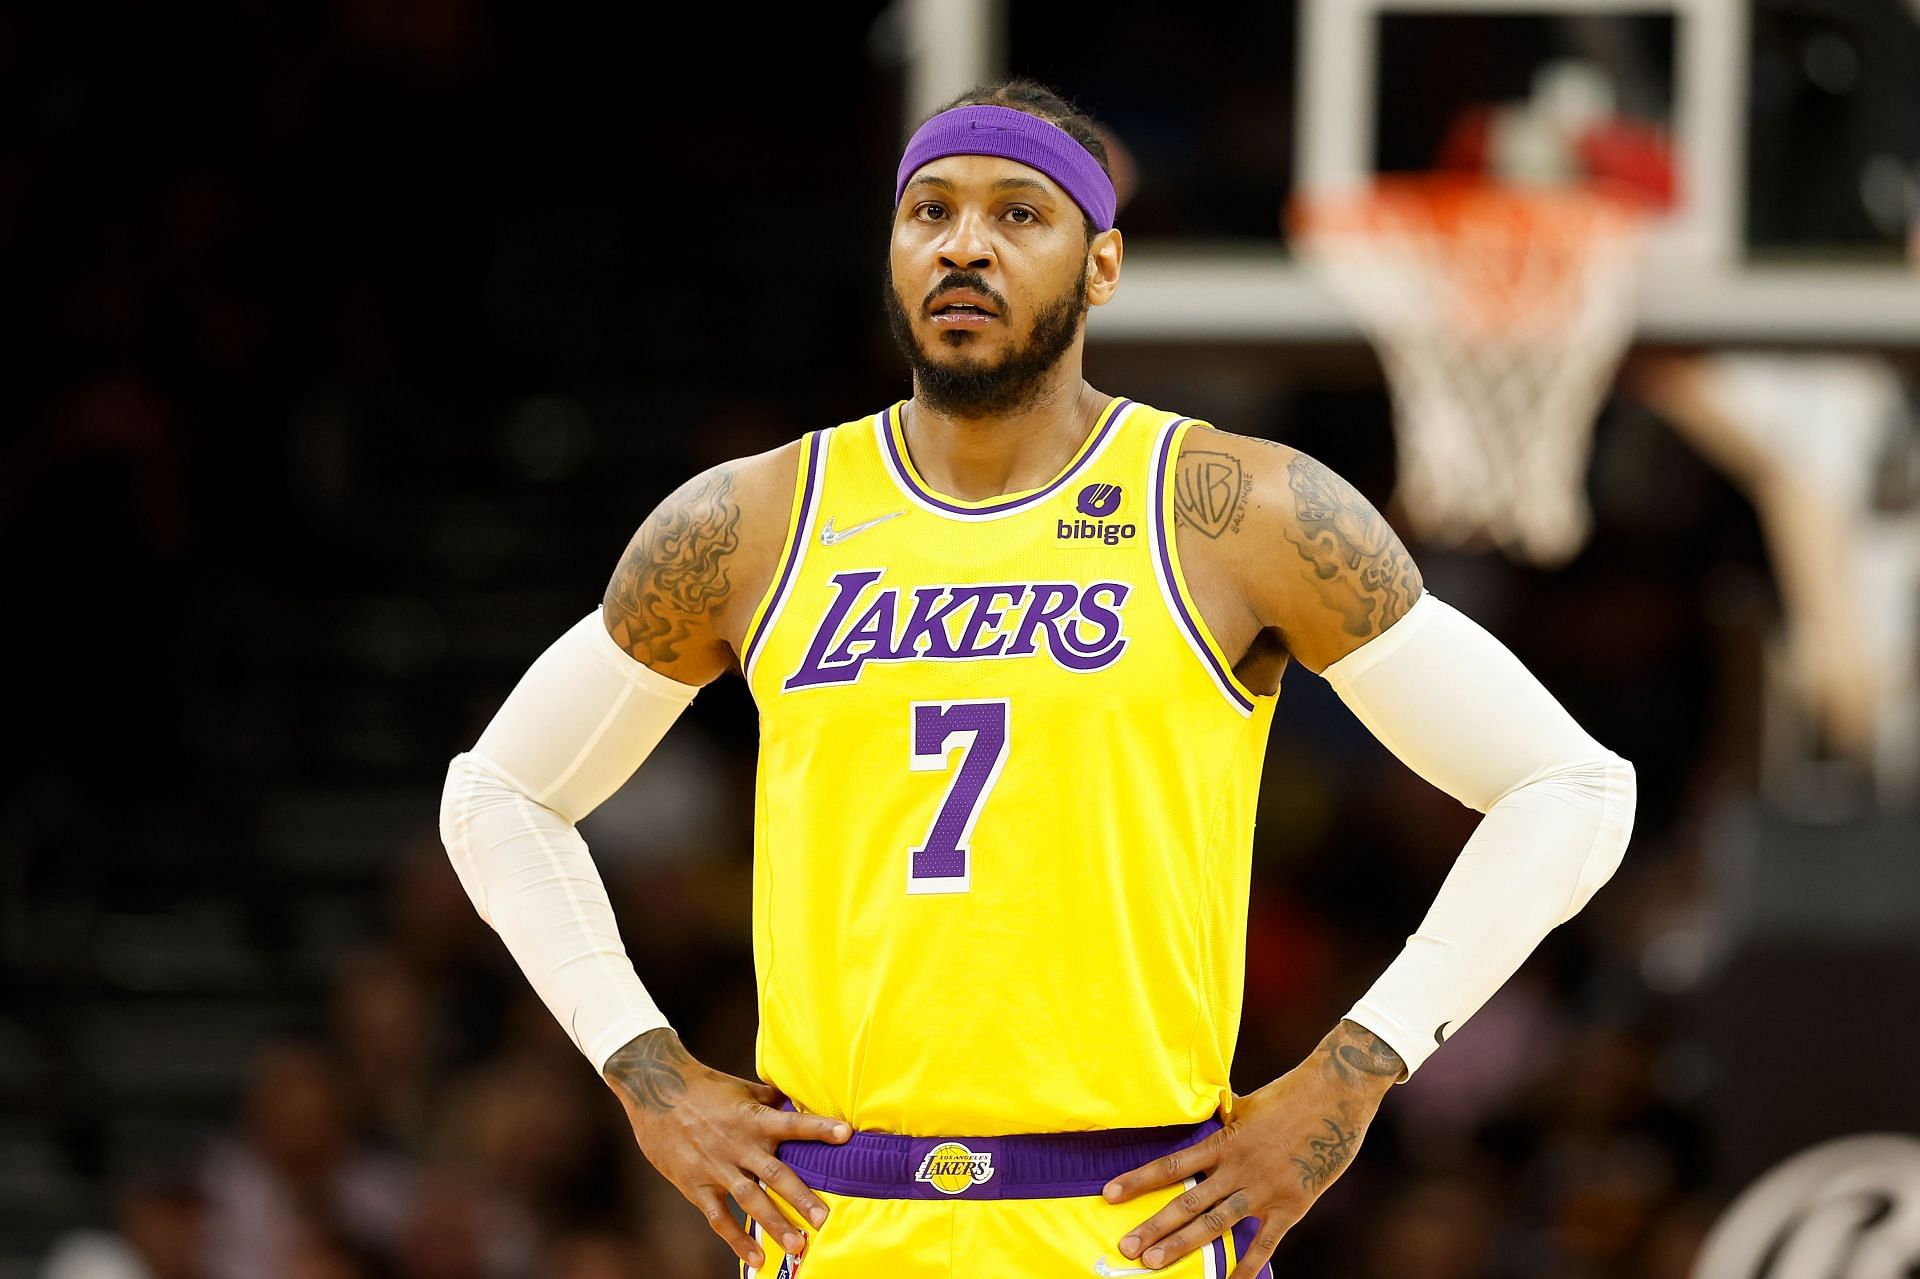 Carmelo Anthony turned out for the LA Lakers last season